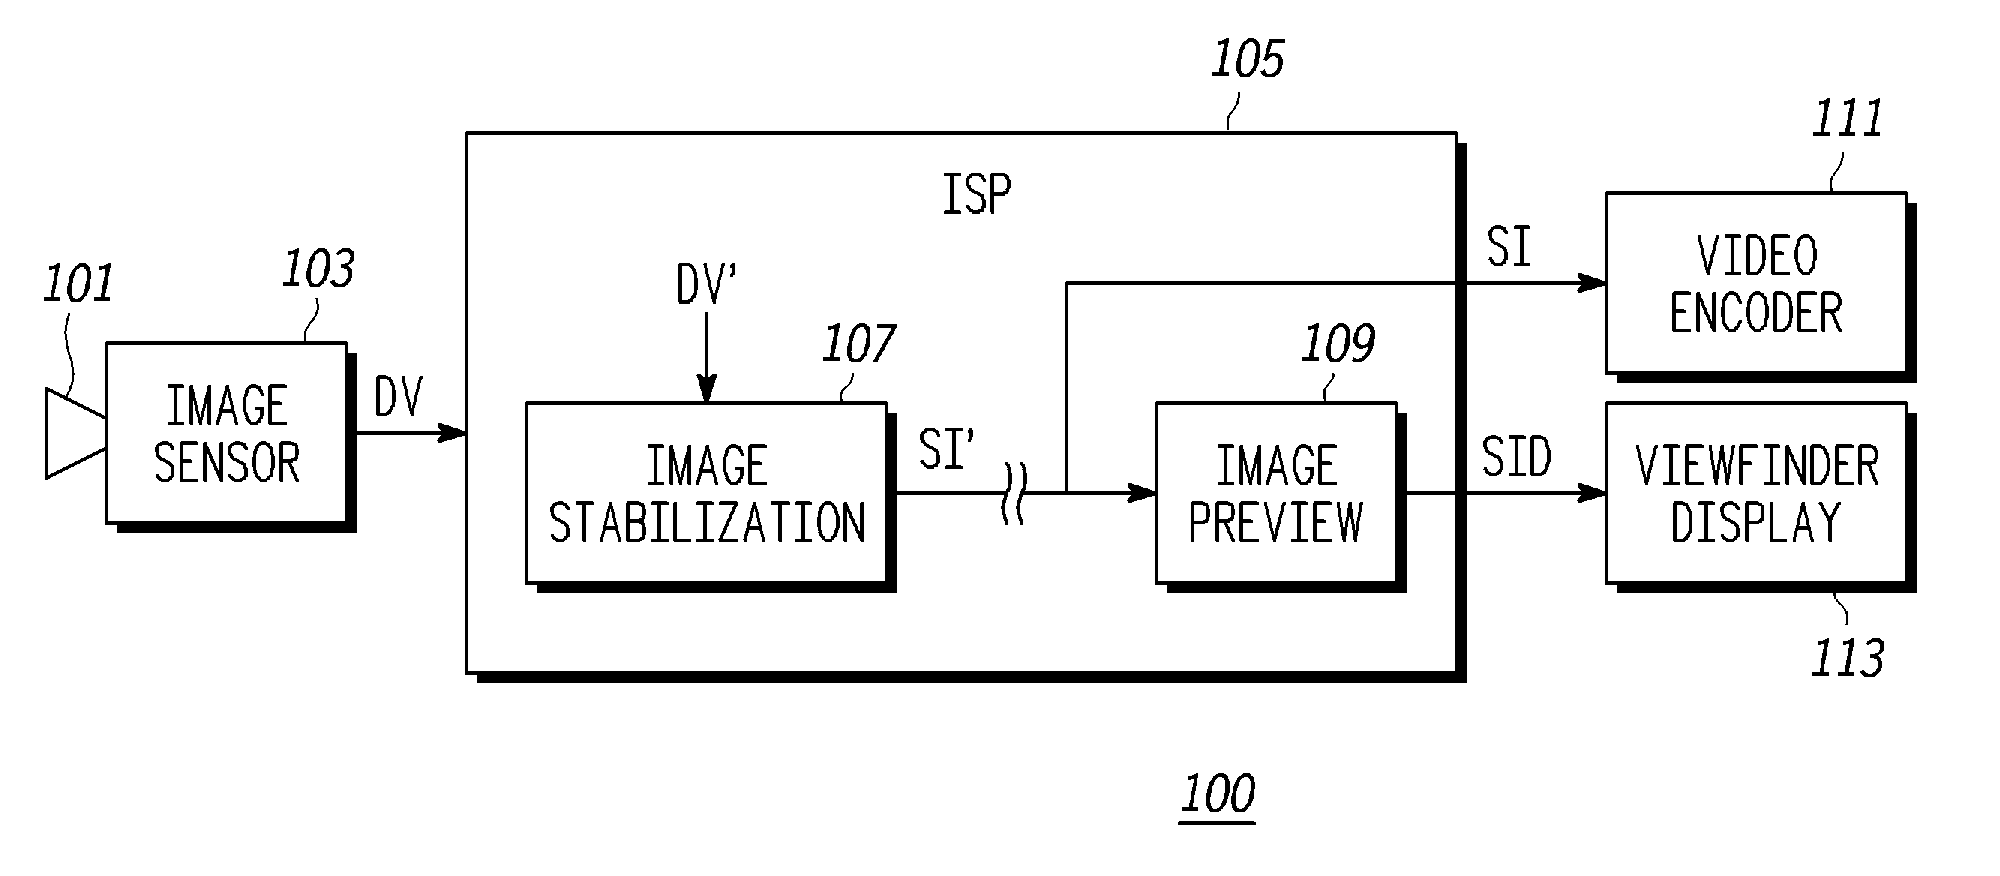 Image and video motion stabilization system